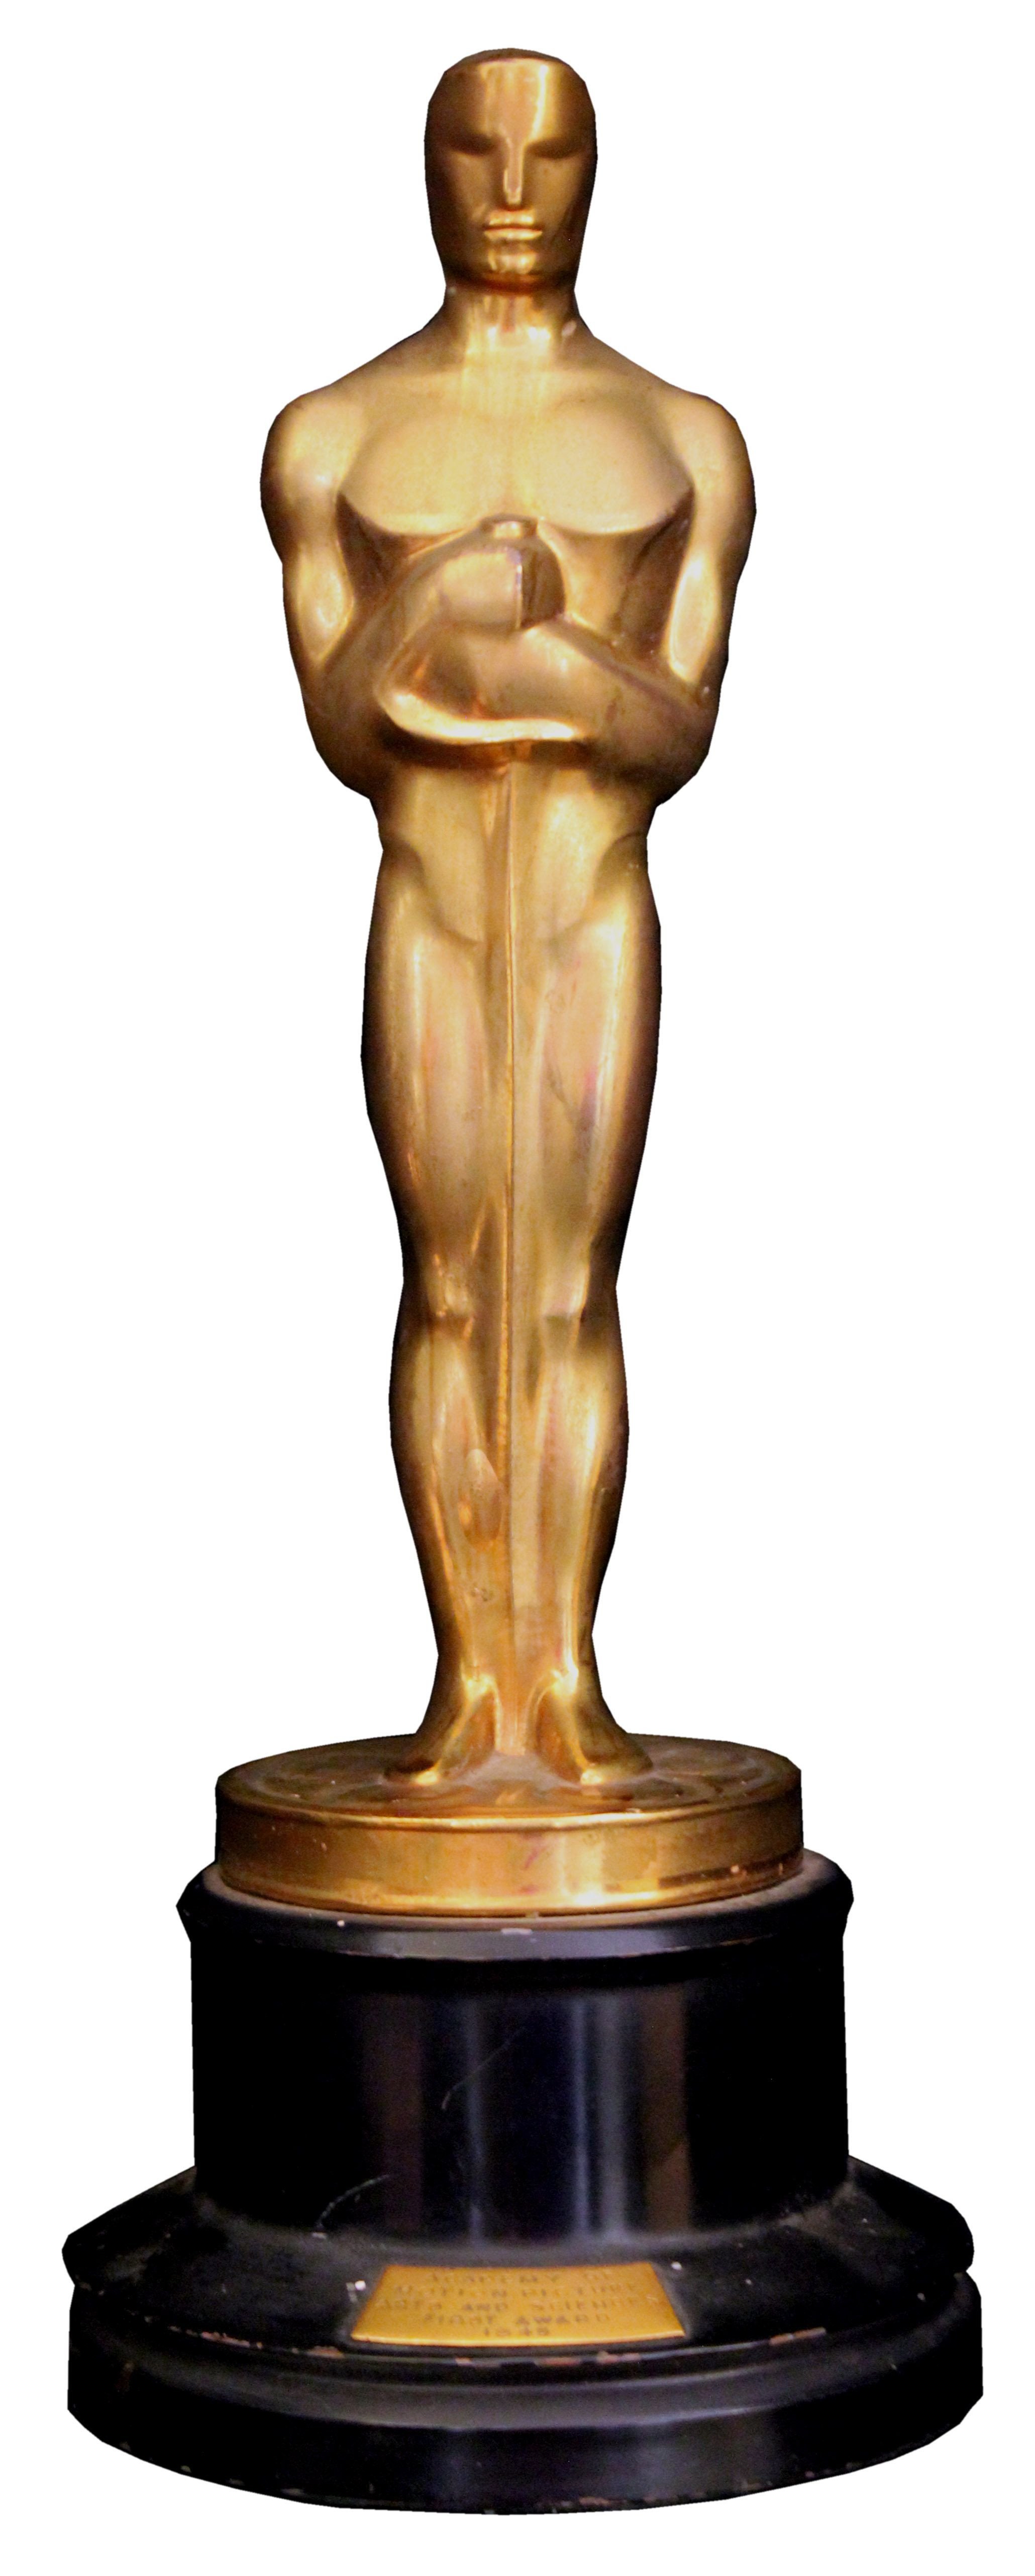 Trophy clipart academy award Pencil and in color trophy